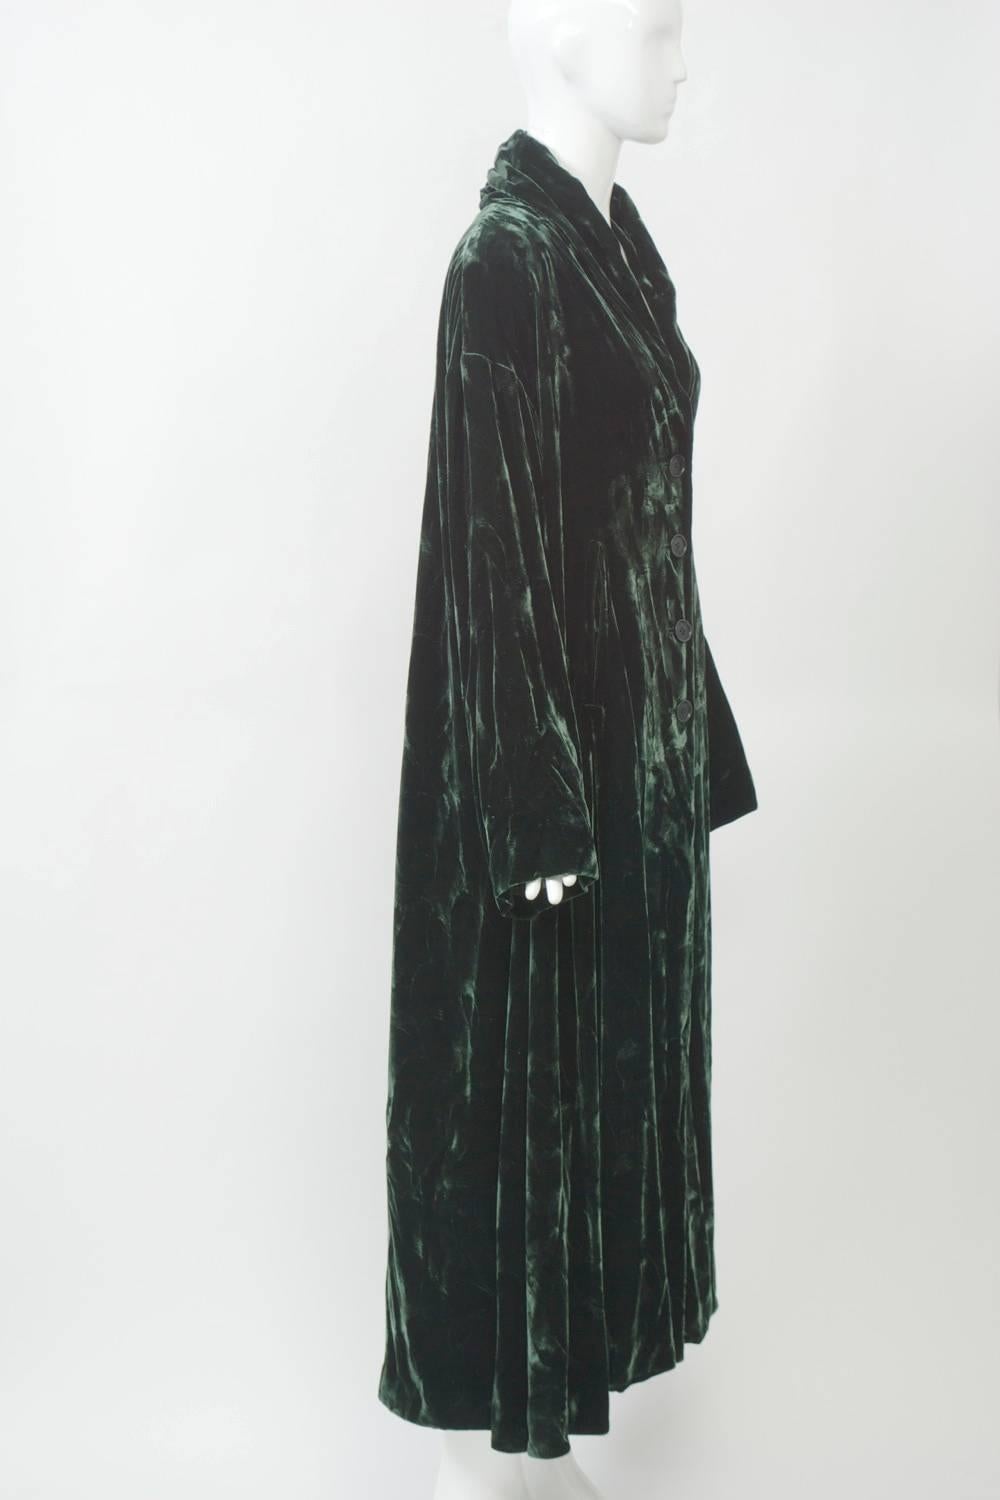 Romeo Gigli mid-calf length coat in crushed dark green velvet. Simple, oversized cut with dropped shoulders, small shawl collar and single-breasted closure with four buttons. Deep vent in back. 